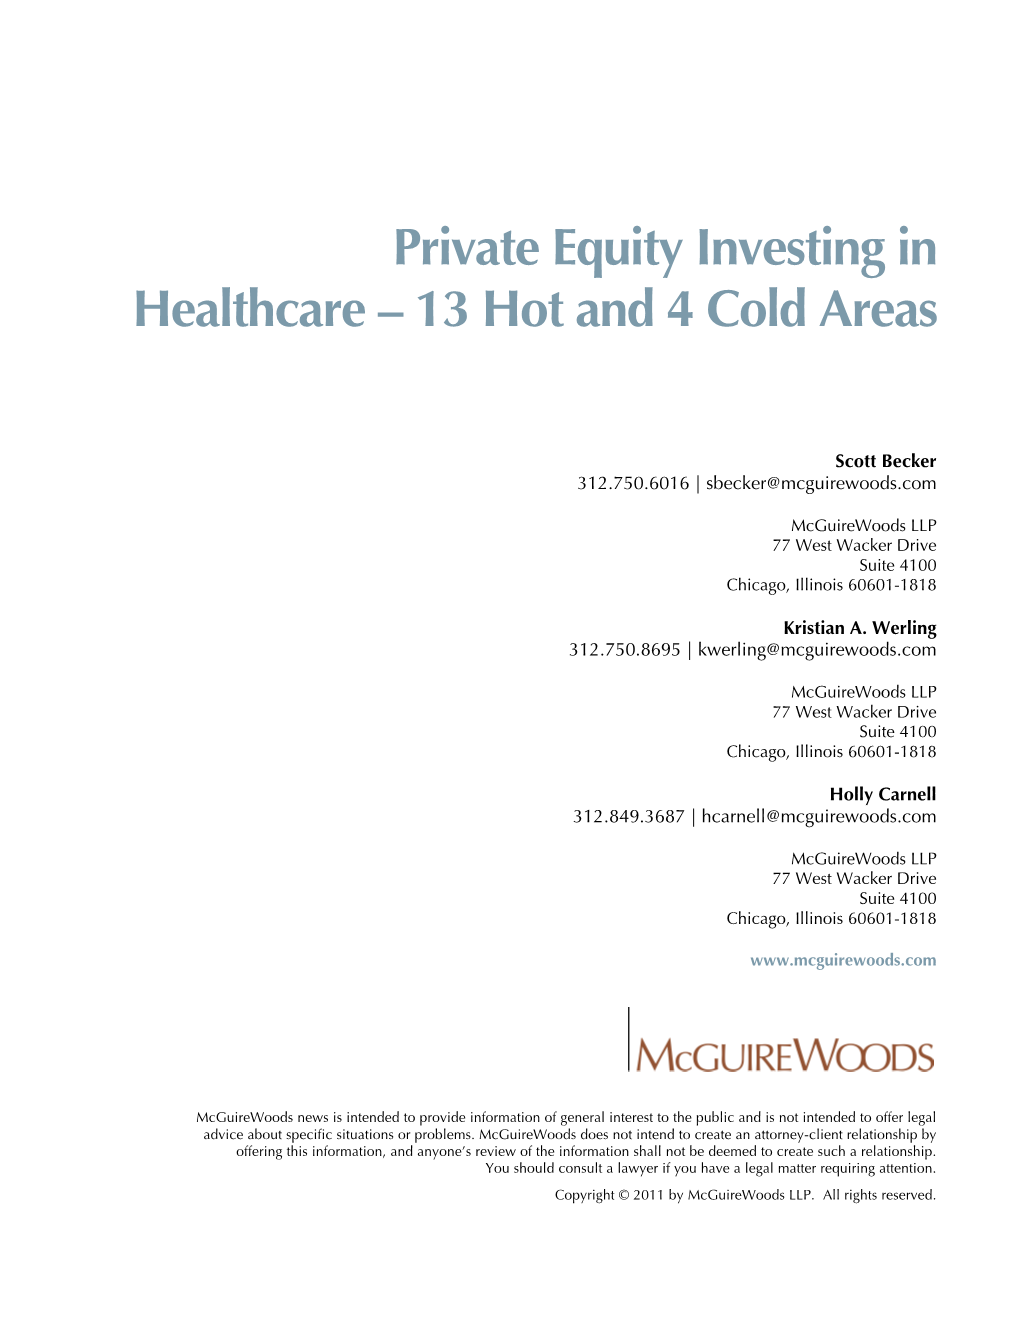 Private Equity Investing in Healthcare – 13 Hot and 4 Cold Areas